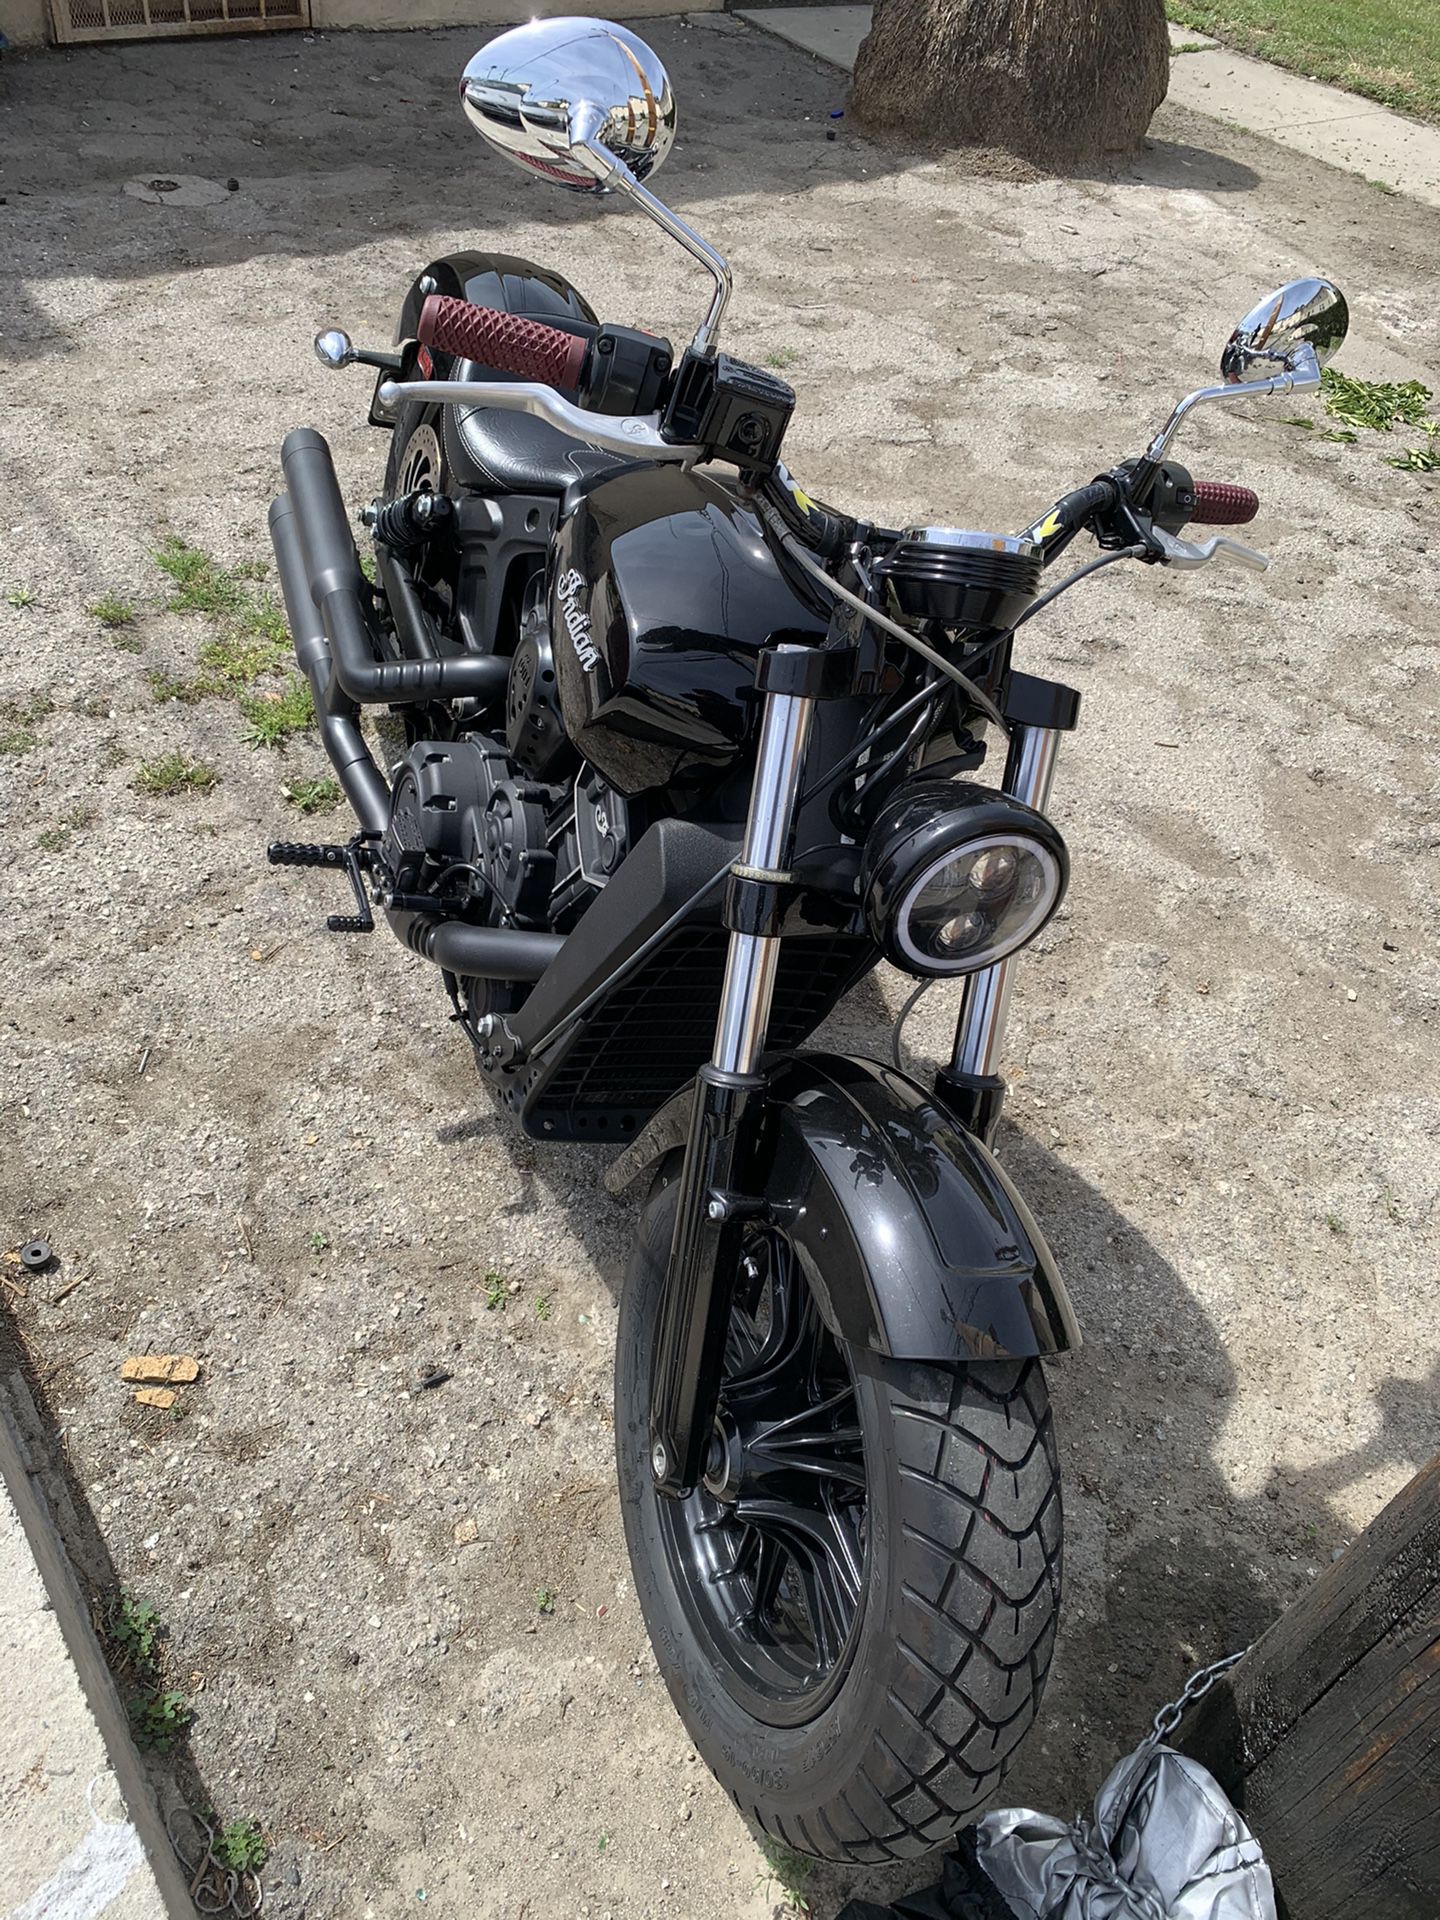 2018 Indian Scout Sixty 